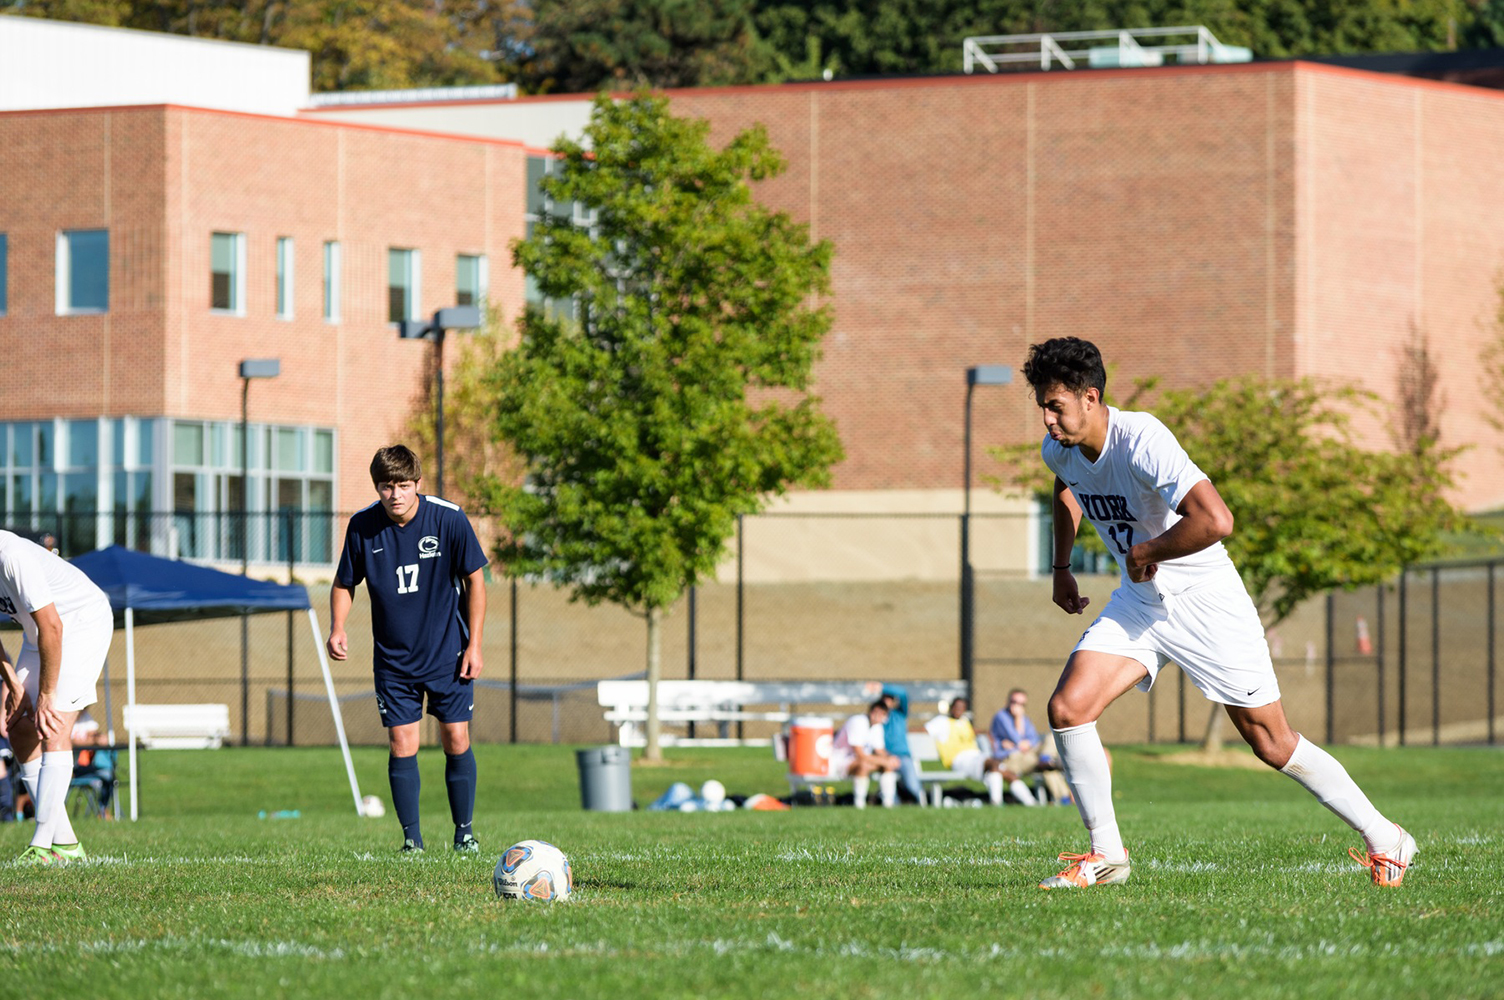 Senior Victor Rodriguez approaches the ball before slotting home the penalty kick.